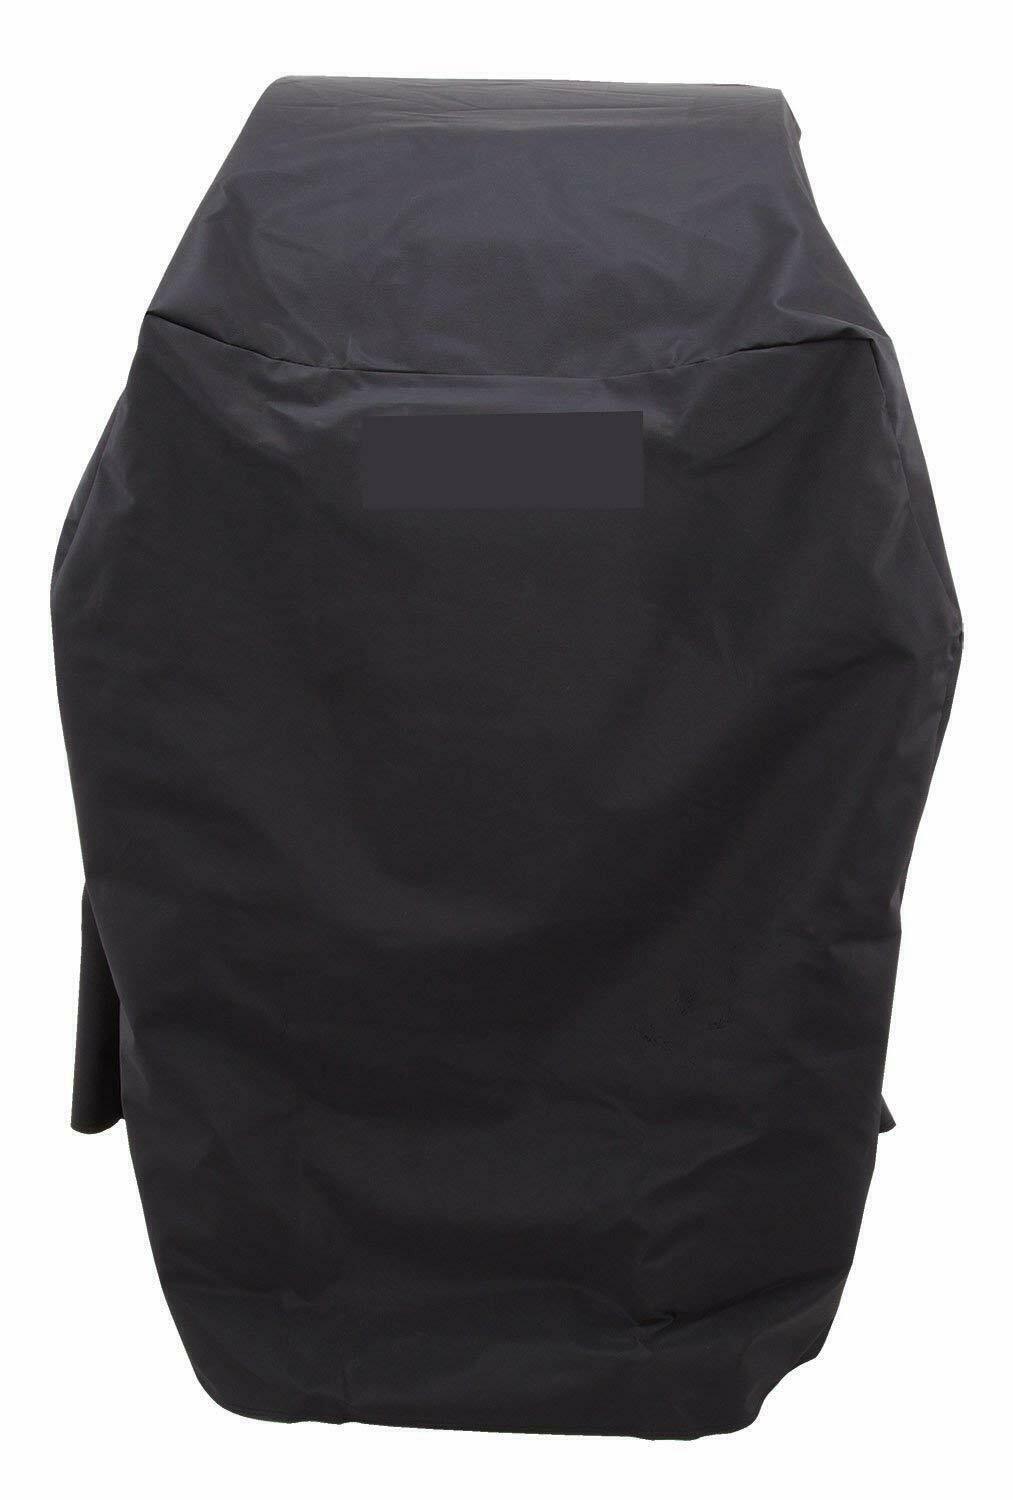 Heavy Duty 32 Inch Bbq Gas Small Grill Cover For Char-broil 2 Burners Waterproof